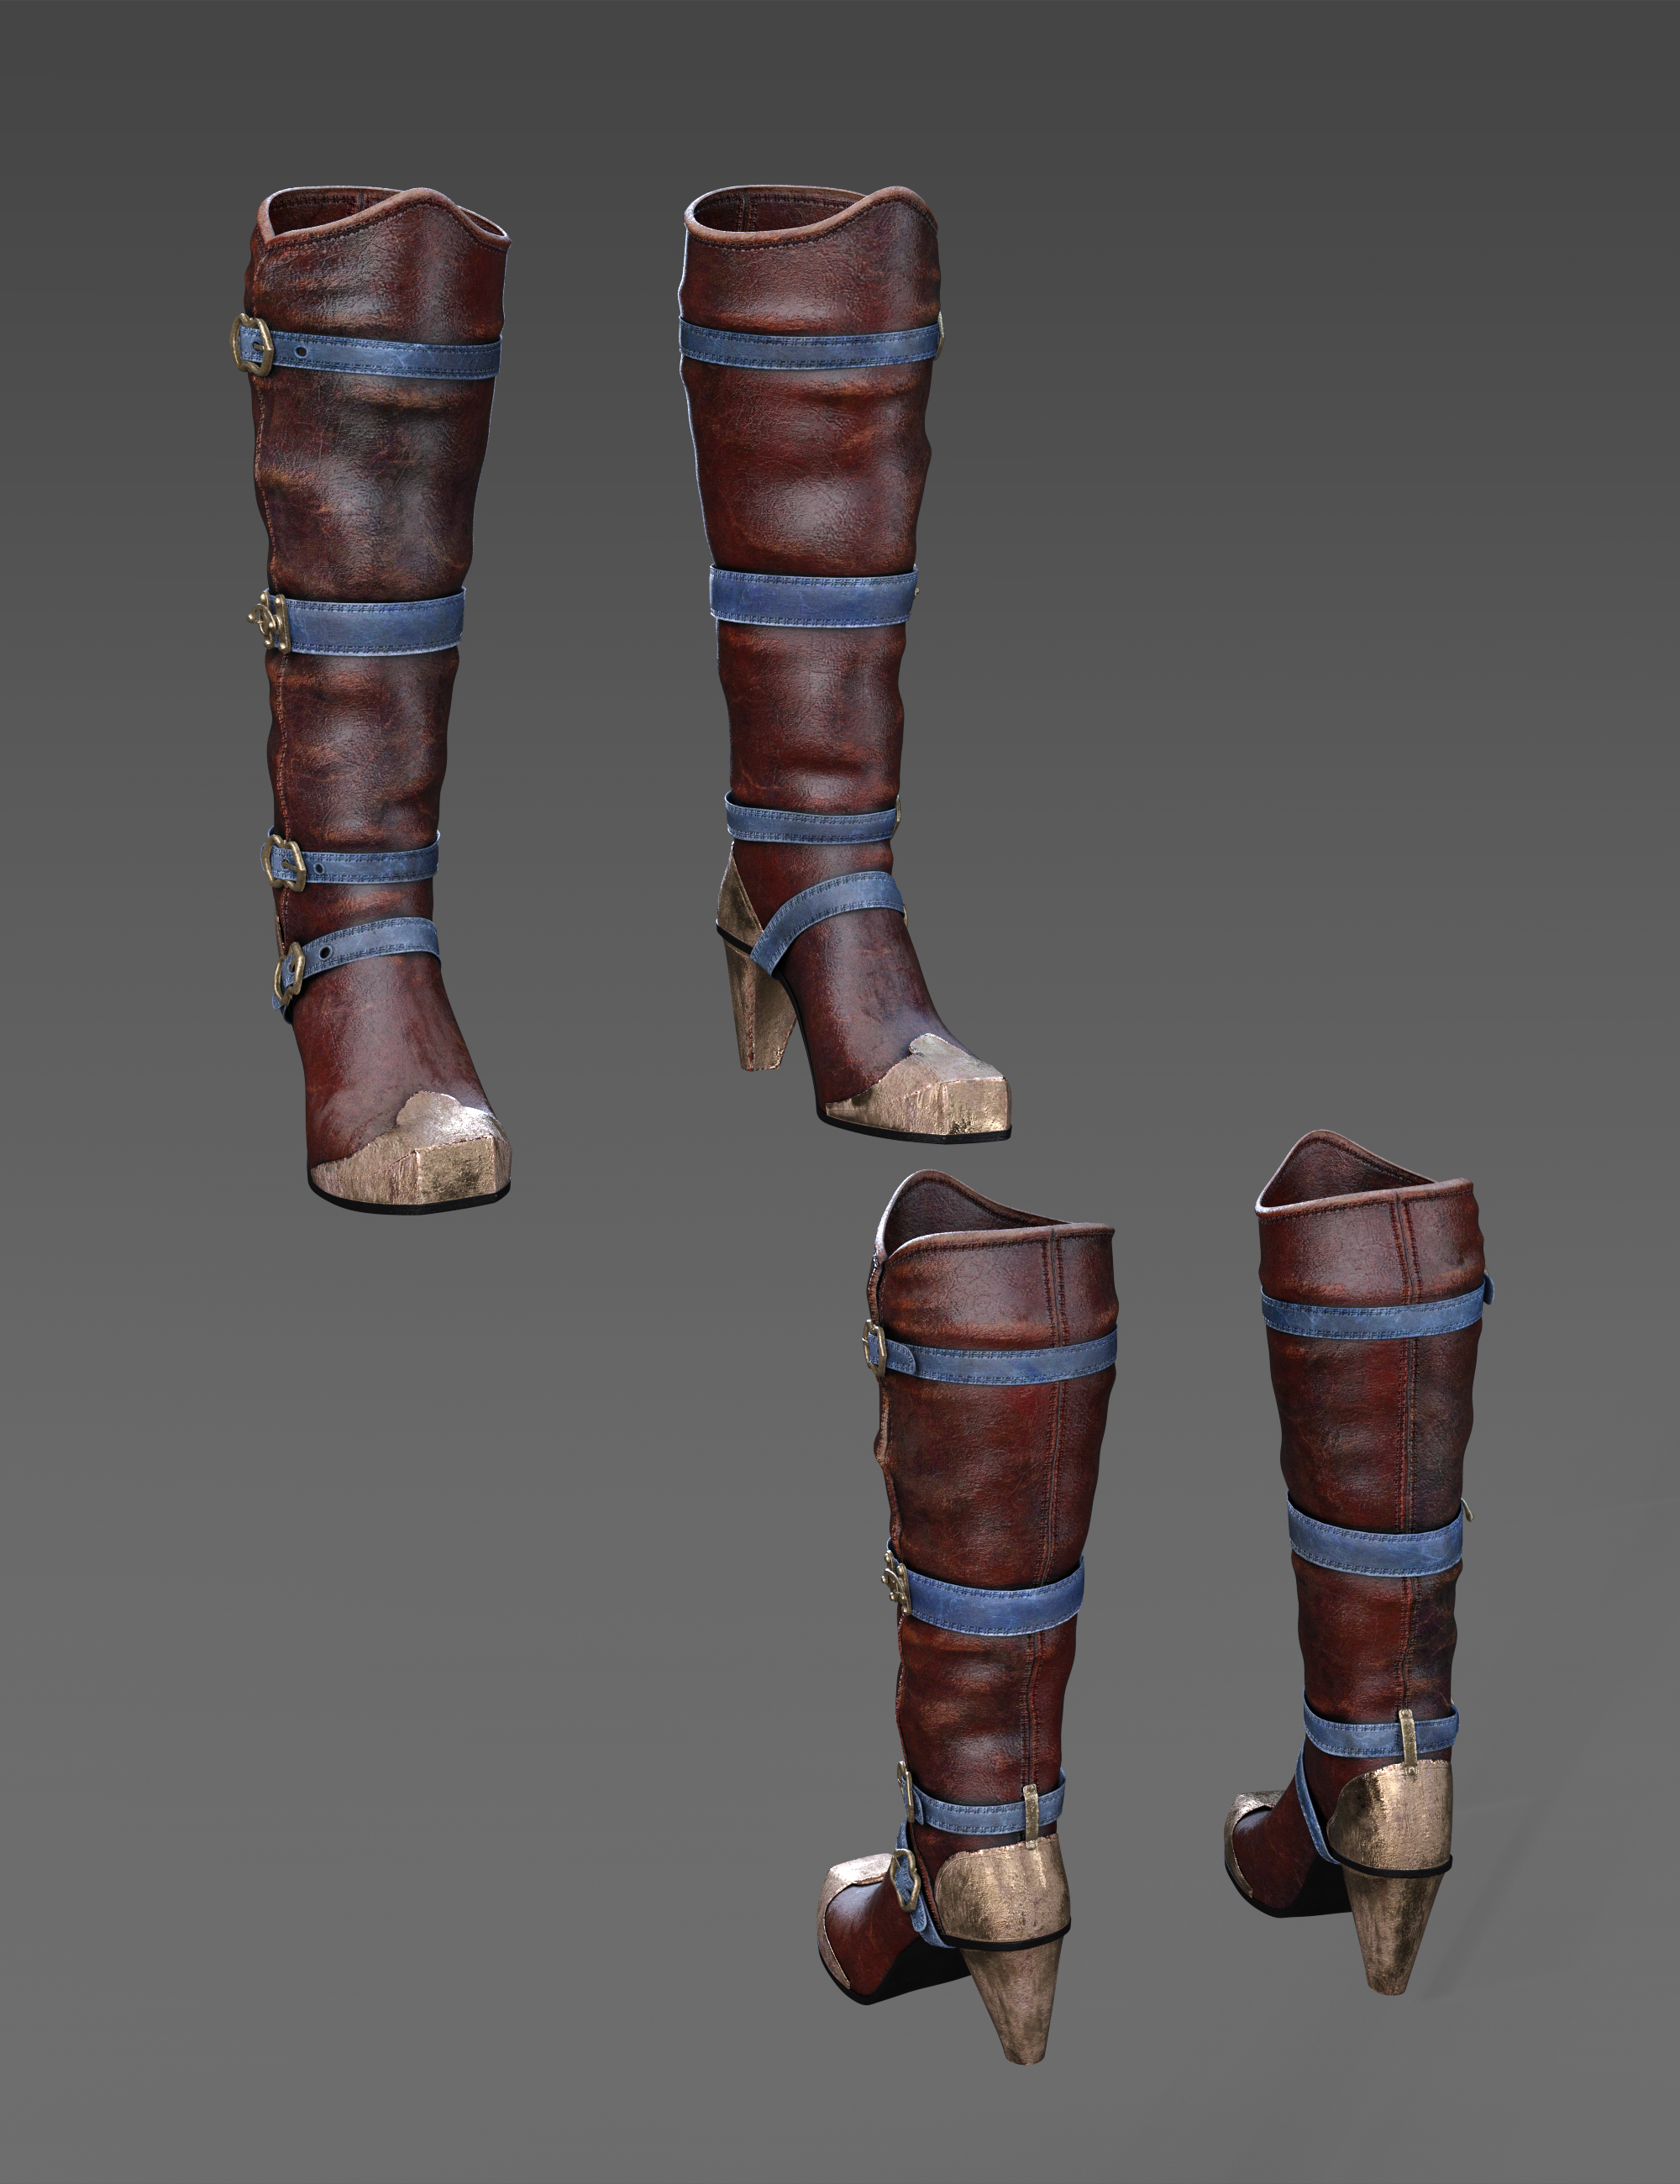 Halcyon Fragment Boots for Genesis 8 and 8.1 Females